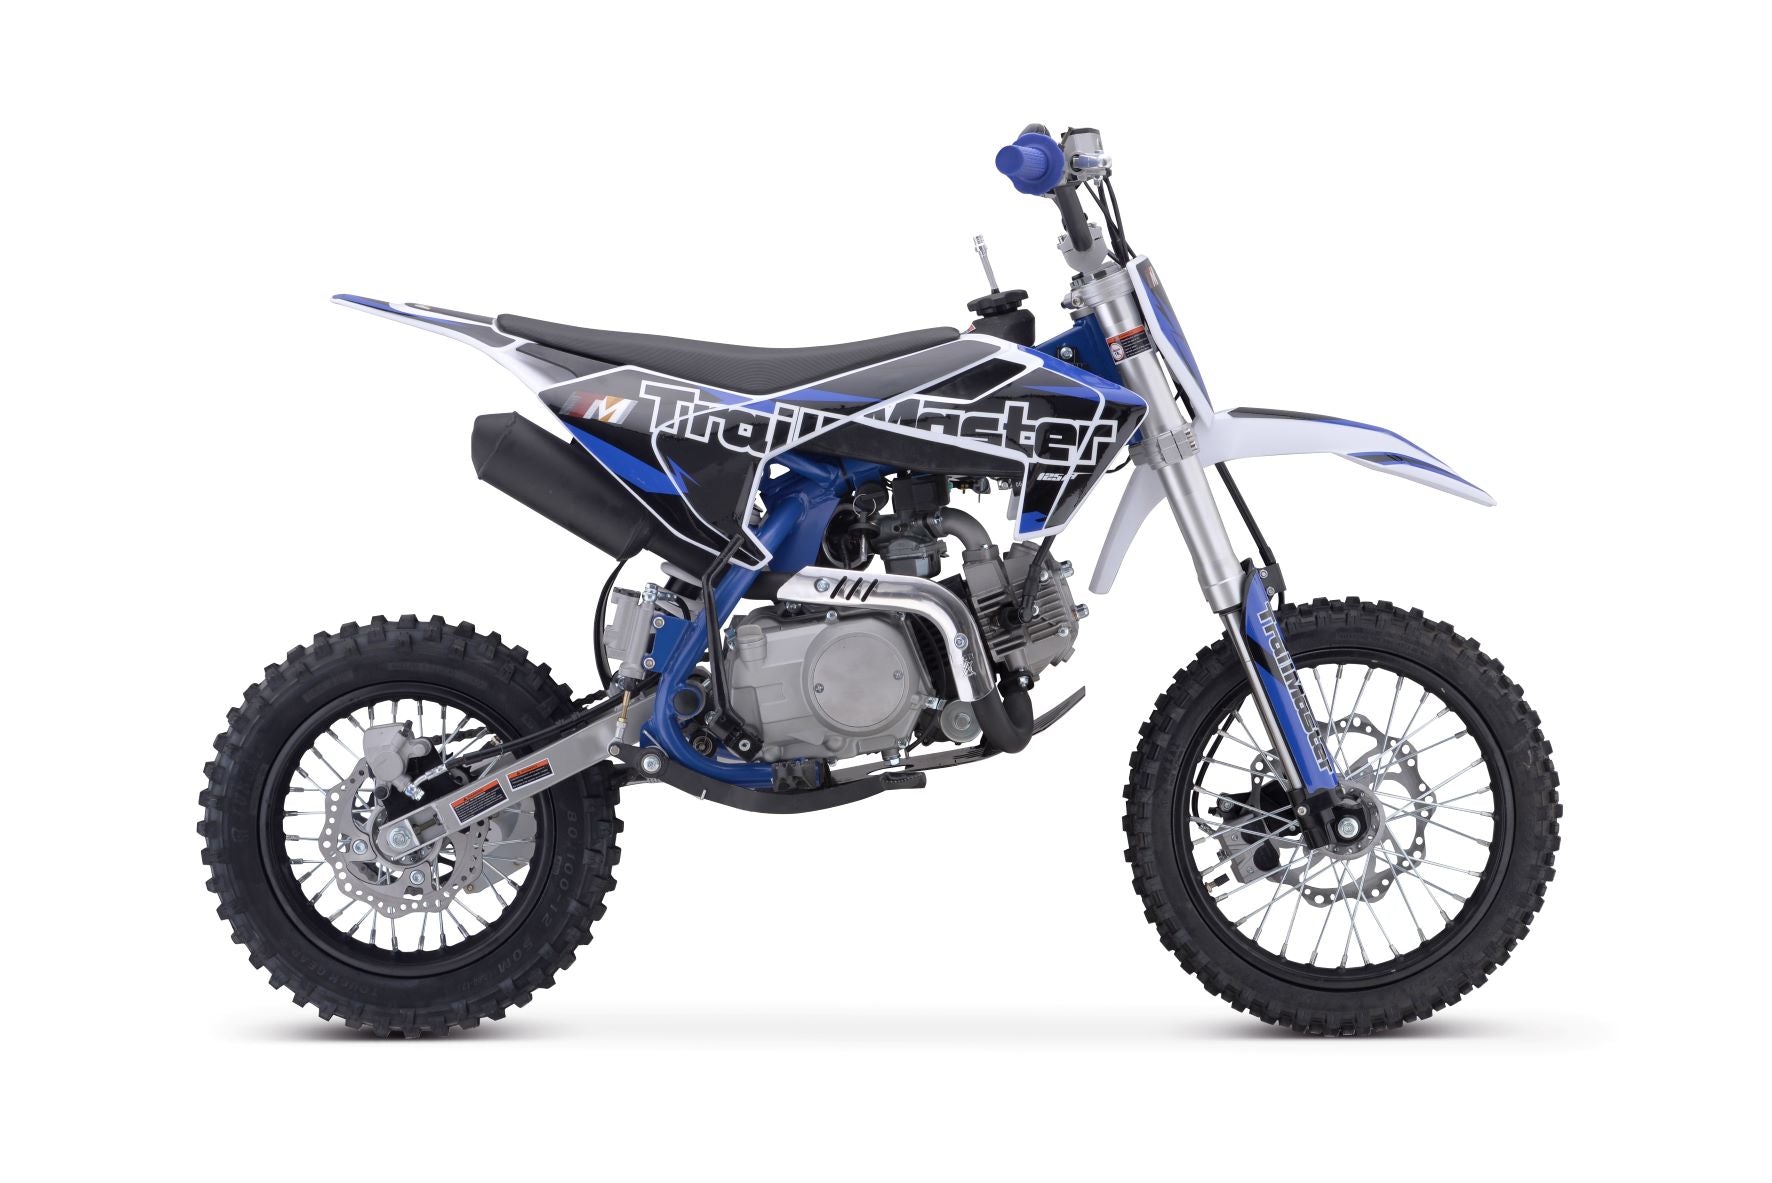 Trailmaster TM23 Dirt Bike 125cc Semi automatic, Electric Start Seat Height 29.3 Inches 14 Front Tire